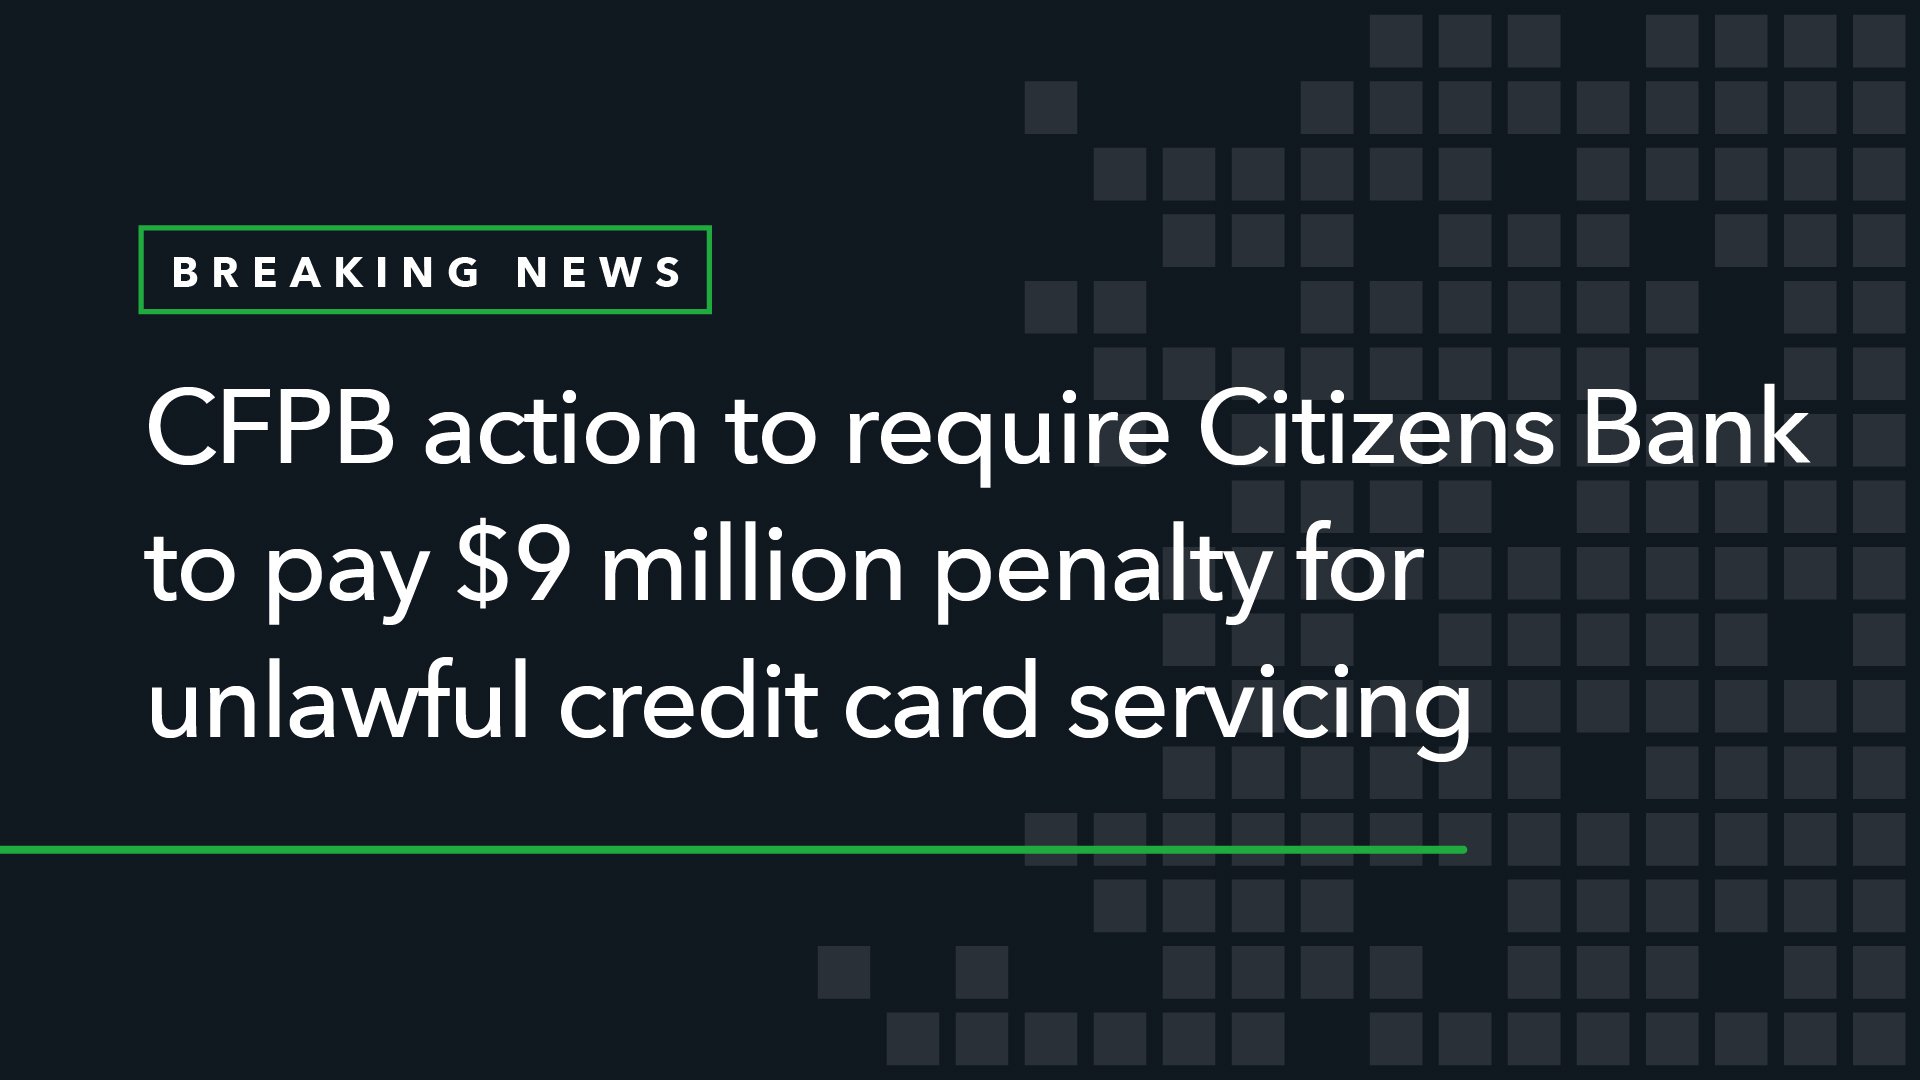 CFPB Action to Require Citizens Bank to Pay $9 Million Penalty for Unlawful Credit Card Servicing